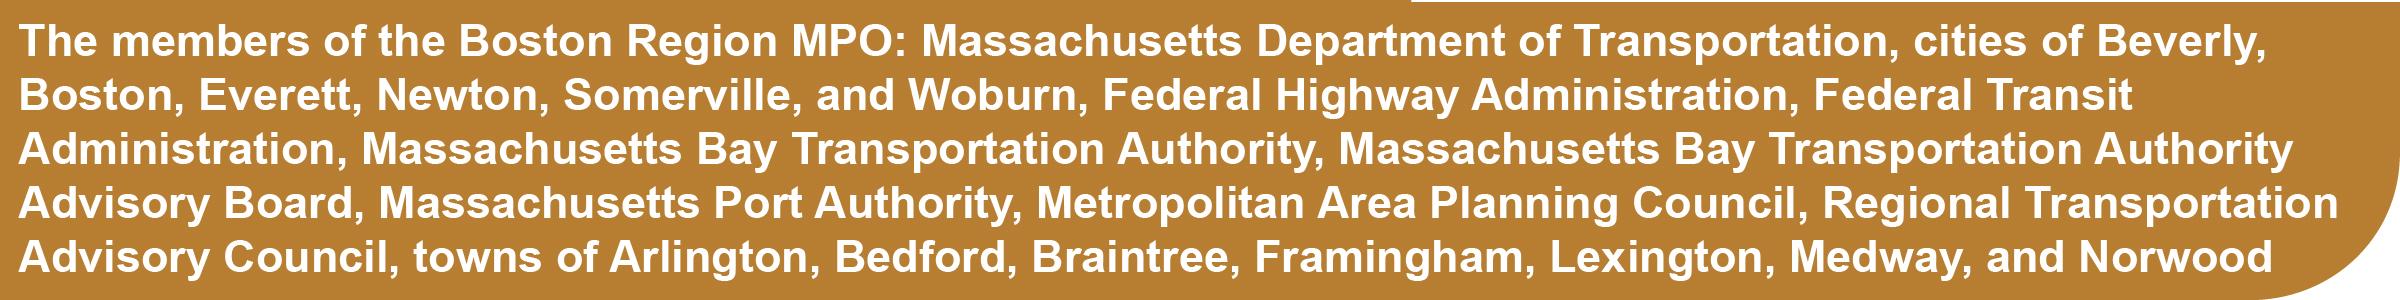 The members of the Boston Region MPO are: Massachusetts Department of Transportation, Cities of Beverly, Boston, Everett, Newton, Somerville, and Woburn, Federal Highway Administration, Federal Transit Administration, Massachusetts Bay Transportation Authority, Massachusetts Bay Transportation Authority Advisory Board, Massachusetts Port Authority, Metropolitan Area Planning Council, Regional Transportation Advisory Council, Towns of Arlington, Bedford, Braintree, Framingham, Lexington, Medway, and Norwood
